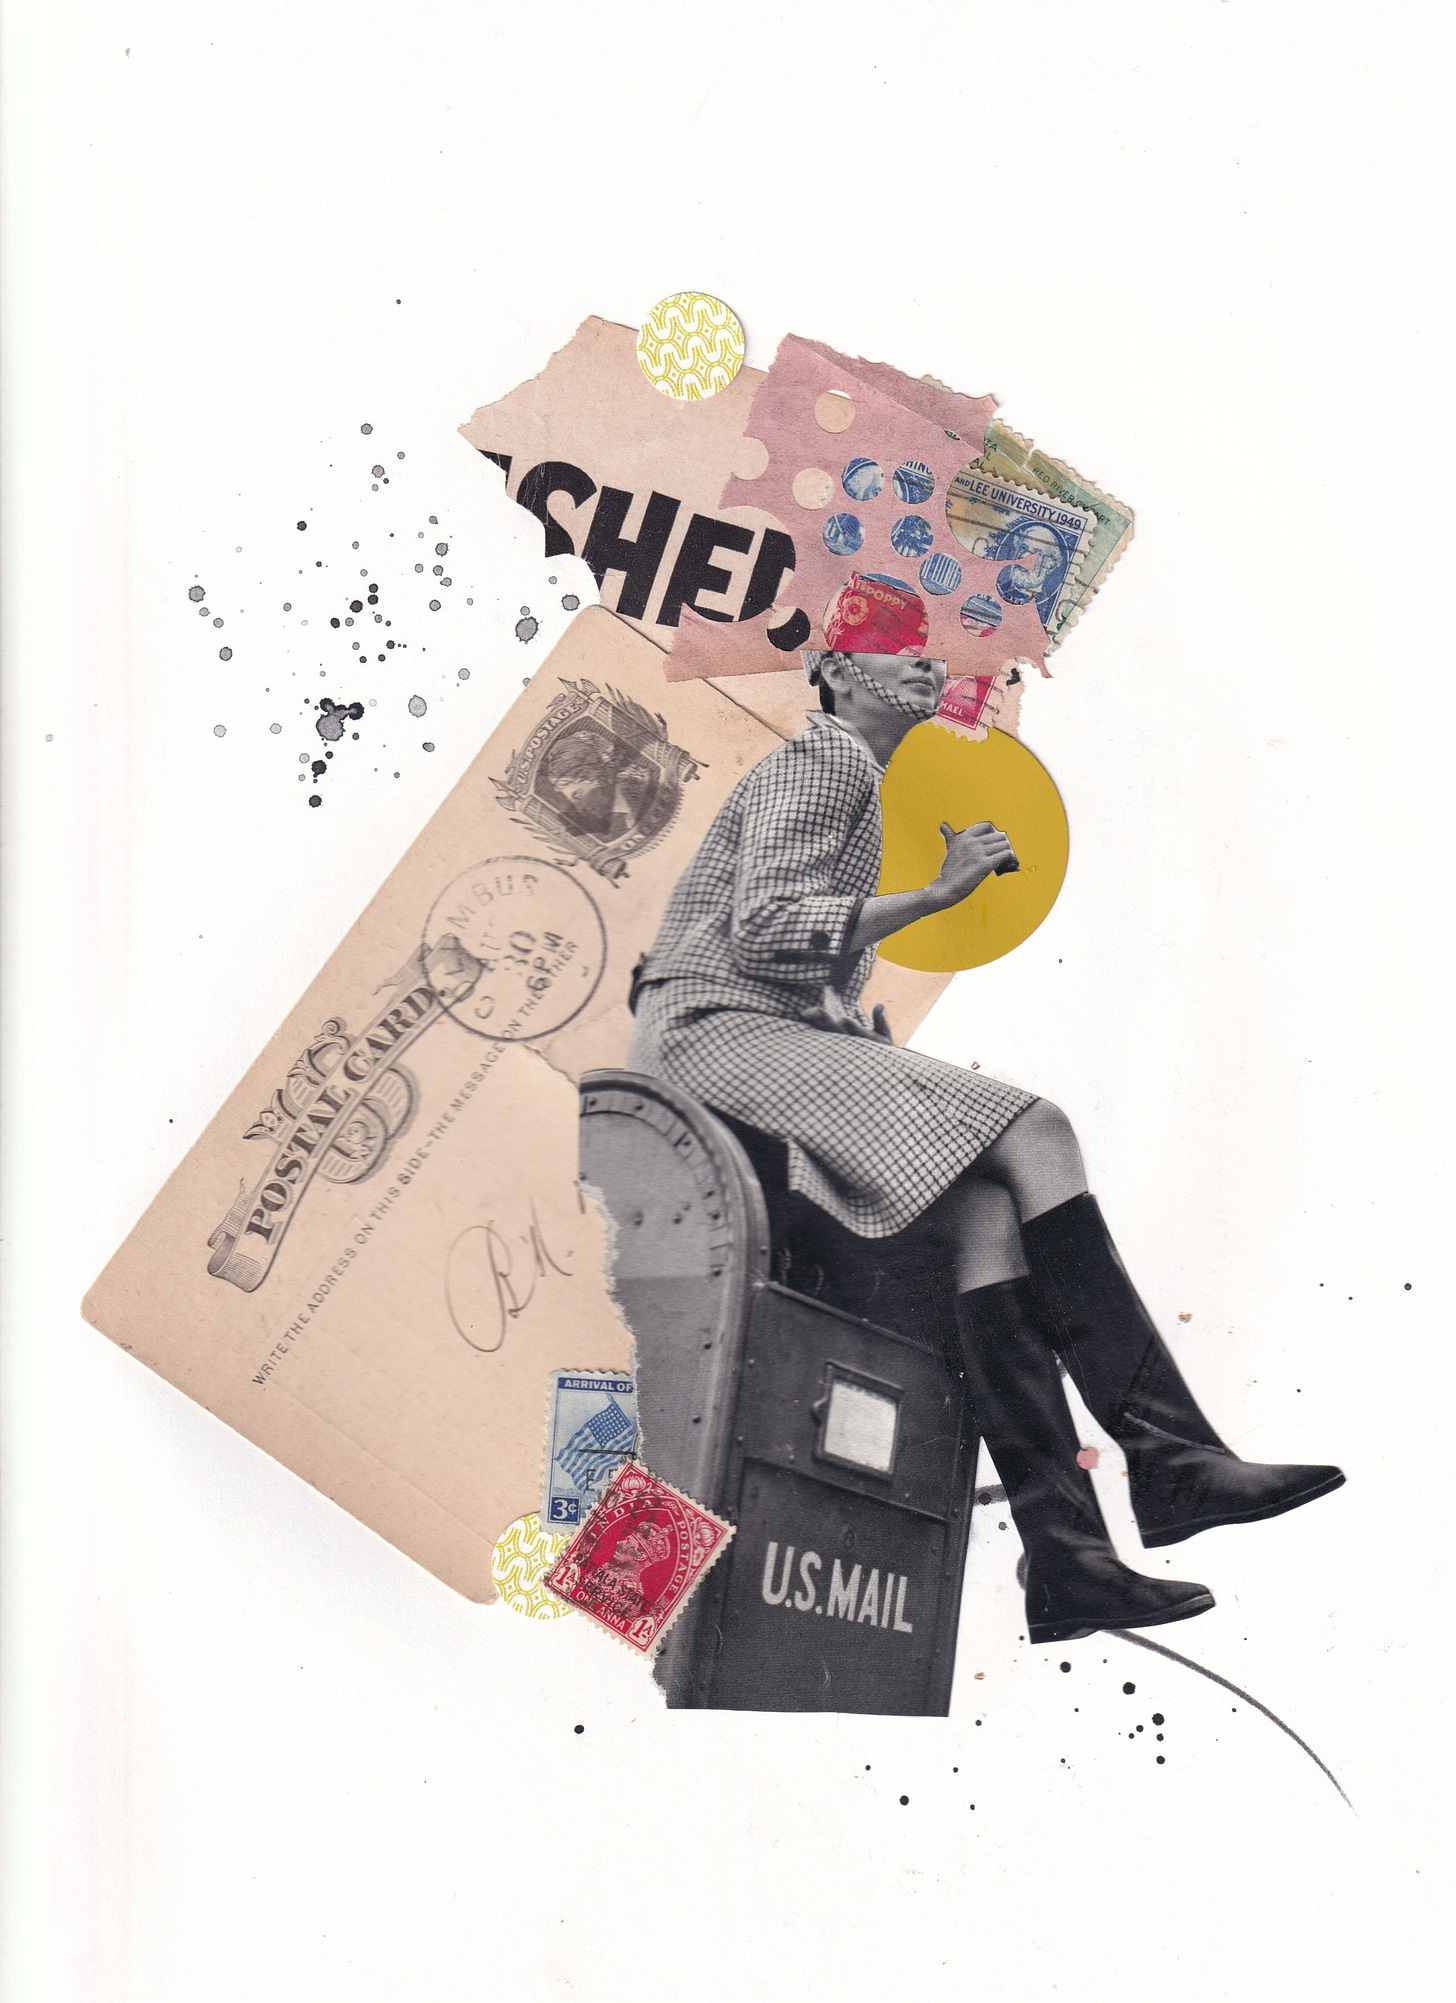 analog collage featuring a vintage postcard, a black and white image of a woman sitting on a mailbox, assorted colorful papers and vintage stamps, plus ink splatter